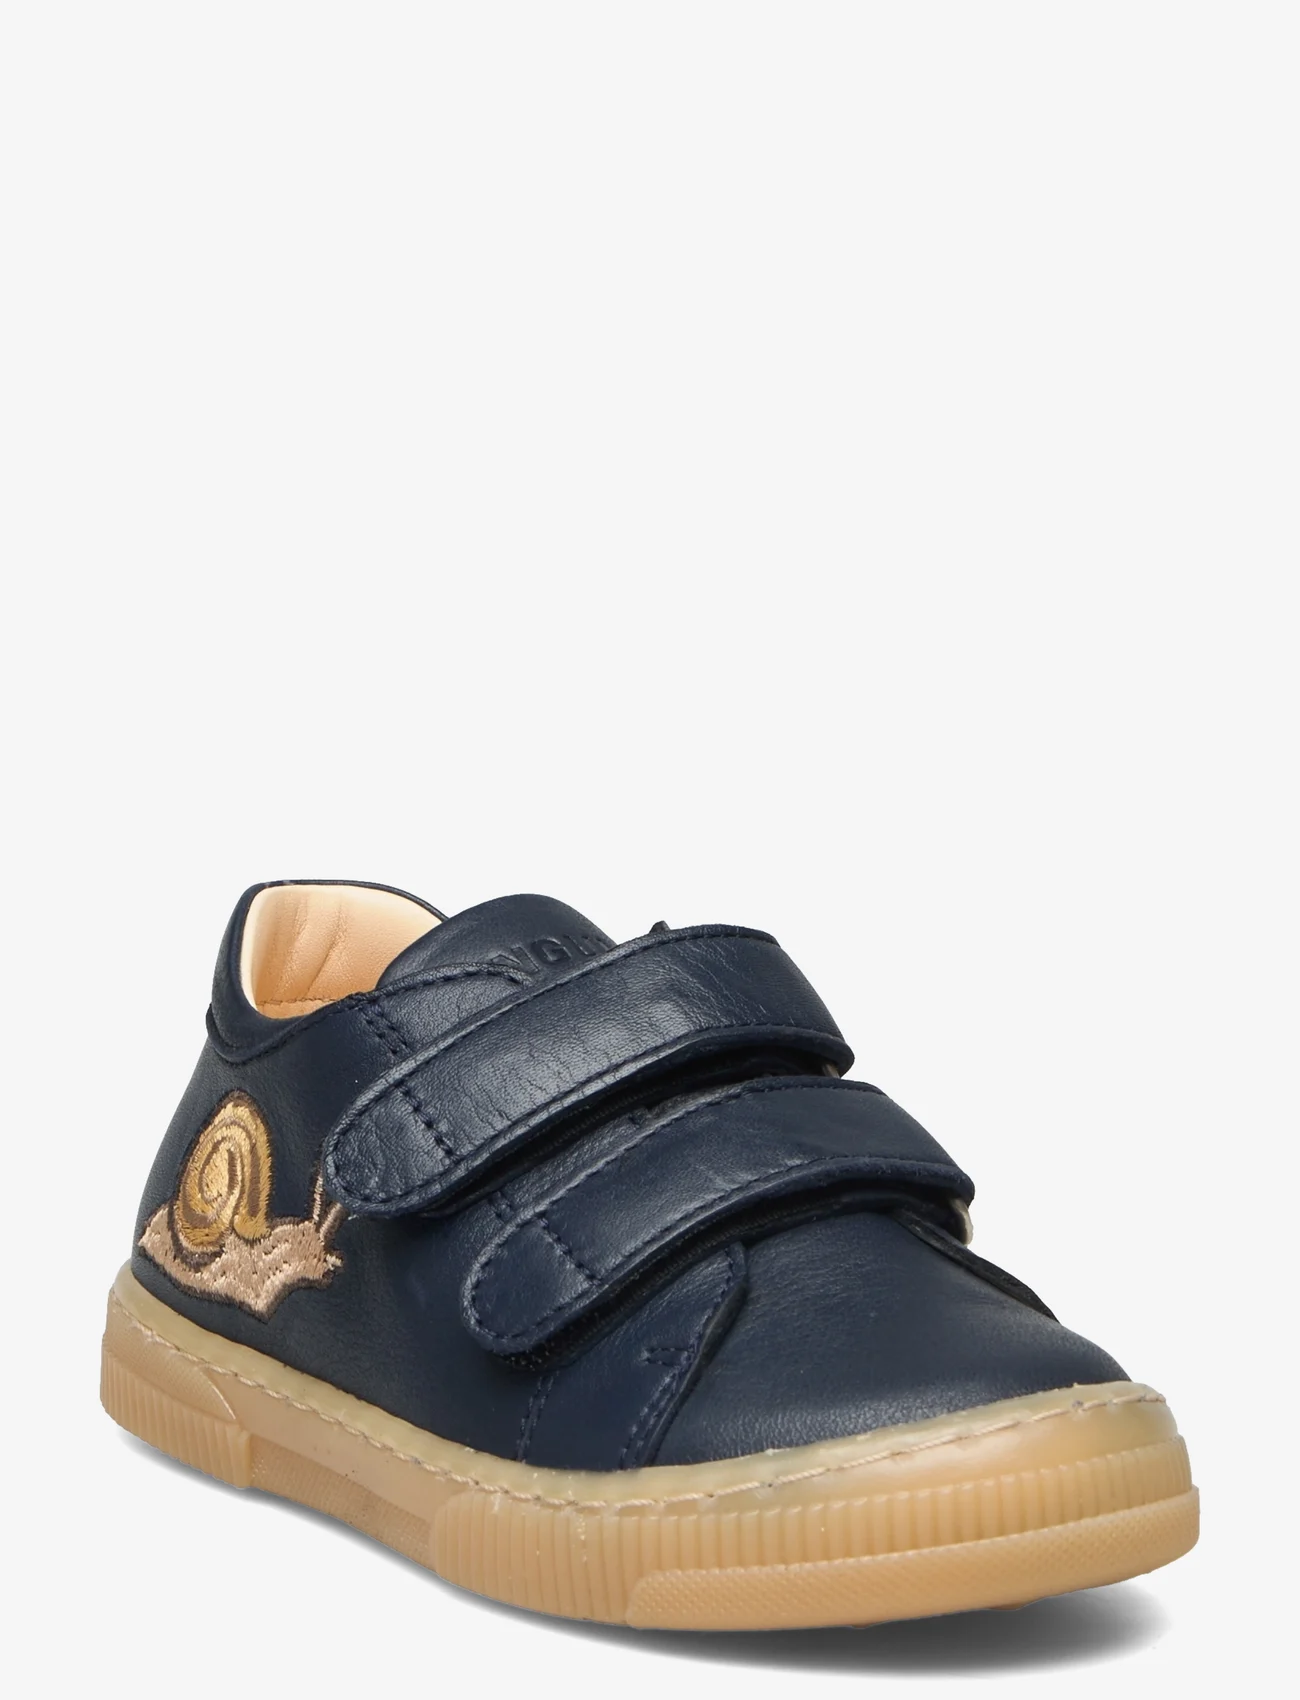 ANGULUS - Shoes - flat - with velcro - sommarfynd - 2585 navy - 0